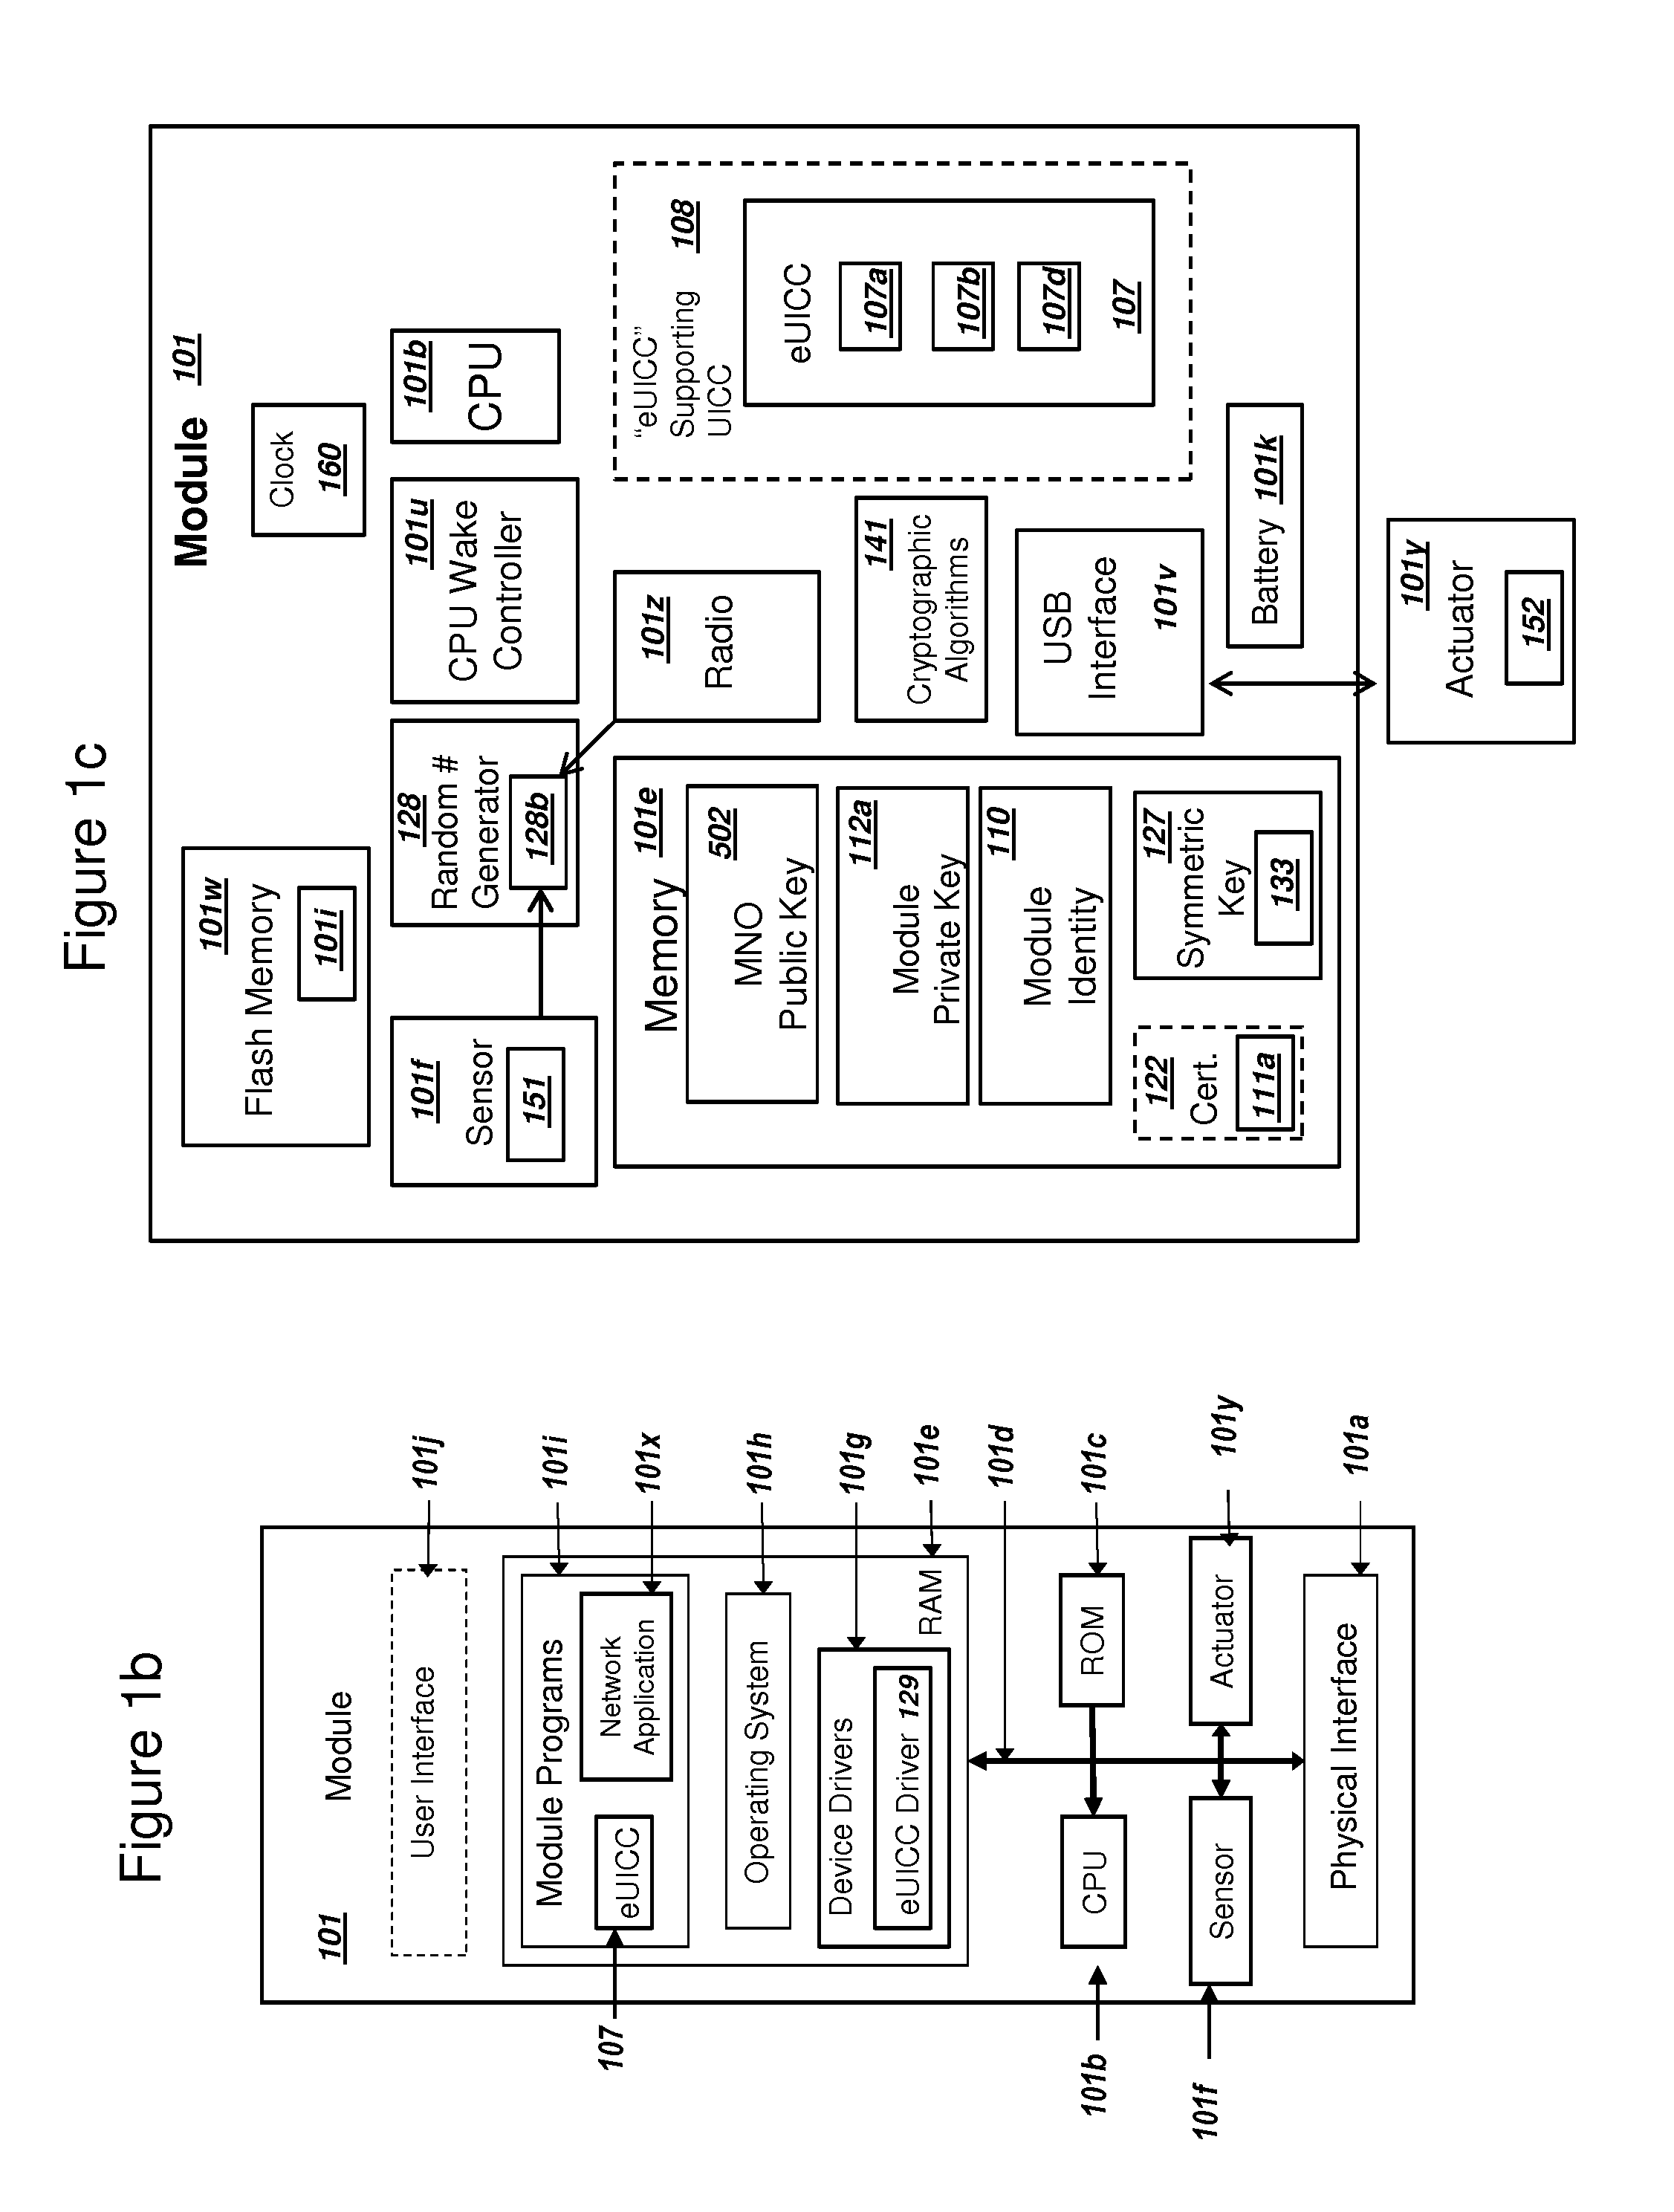 Network Supporting Two-Factor Authentication for Modules with Embedded Universal Integrated Circuit Cards